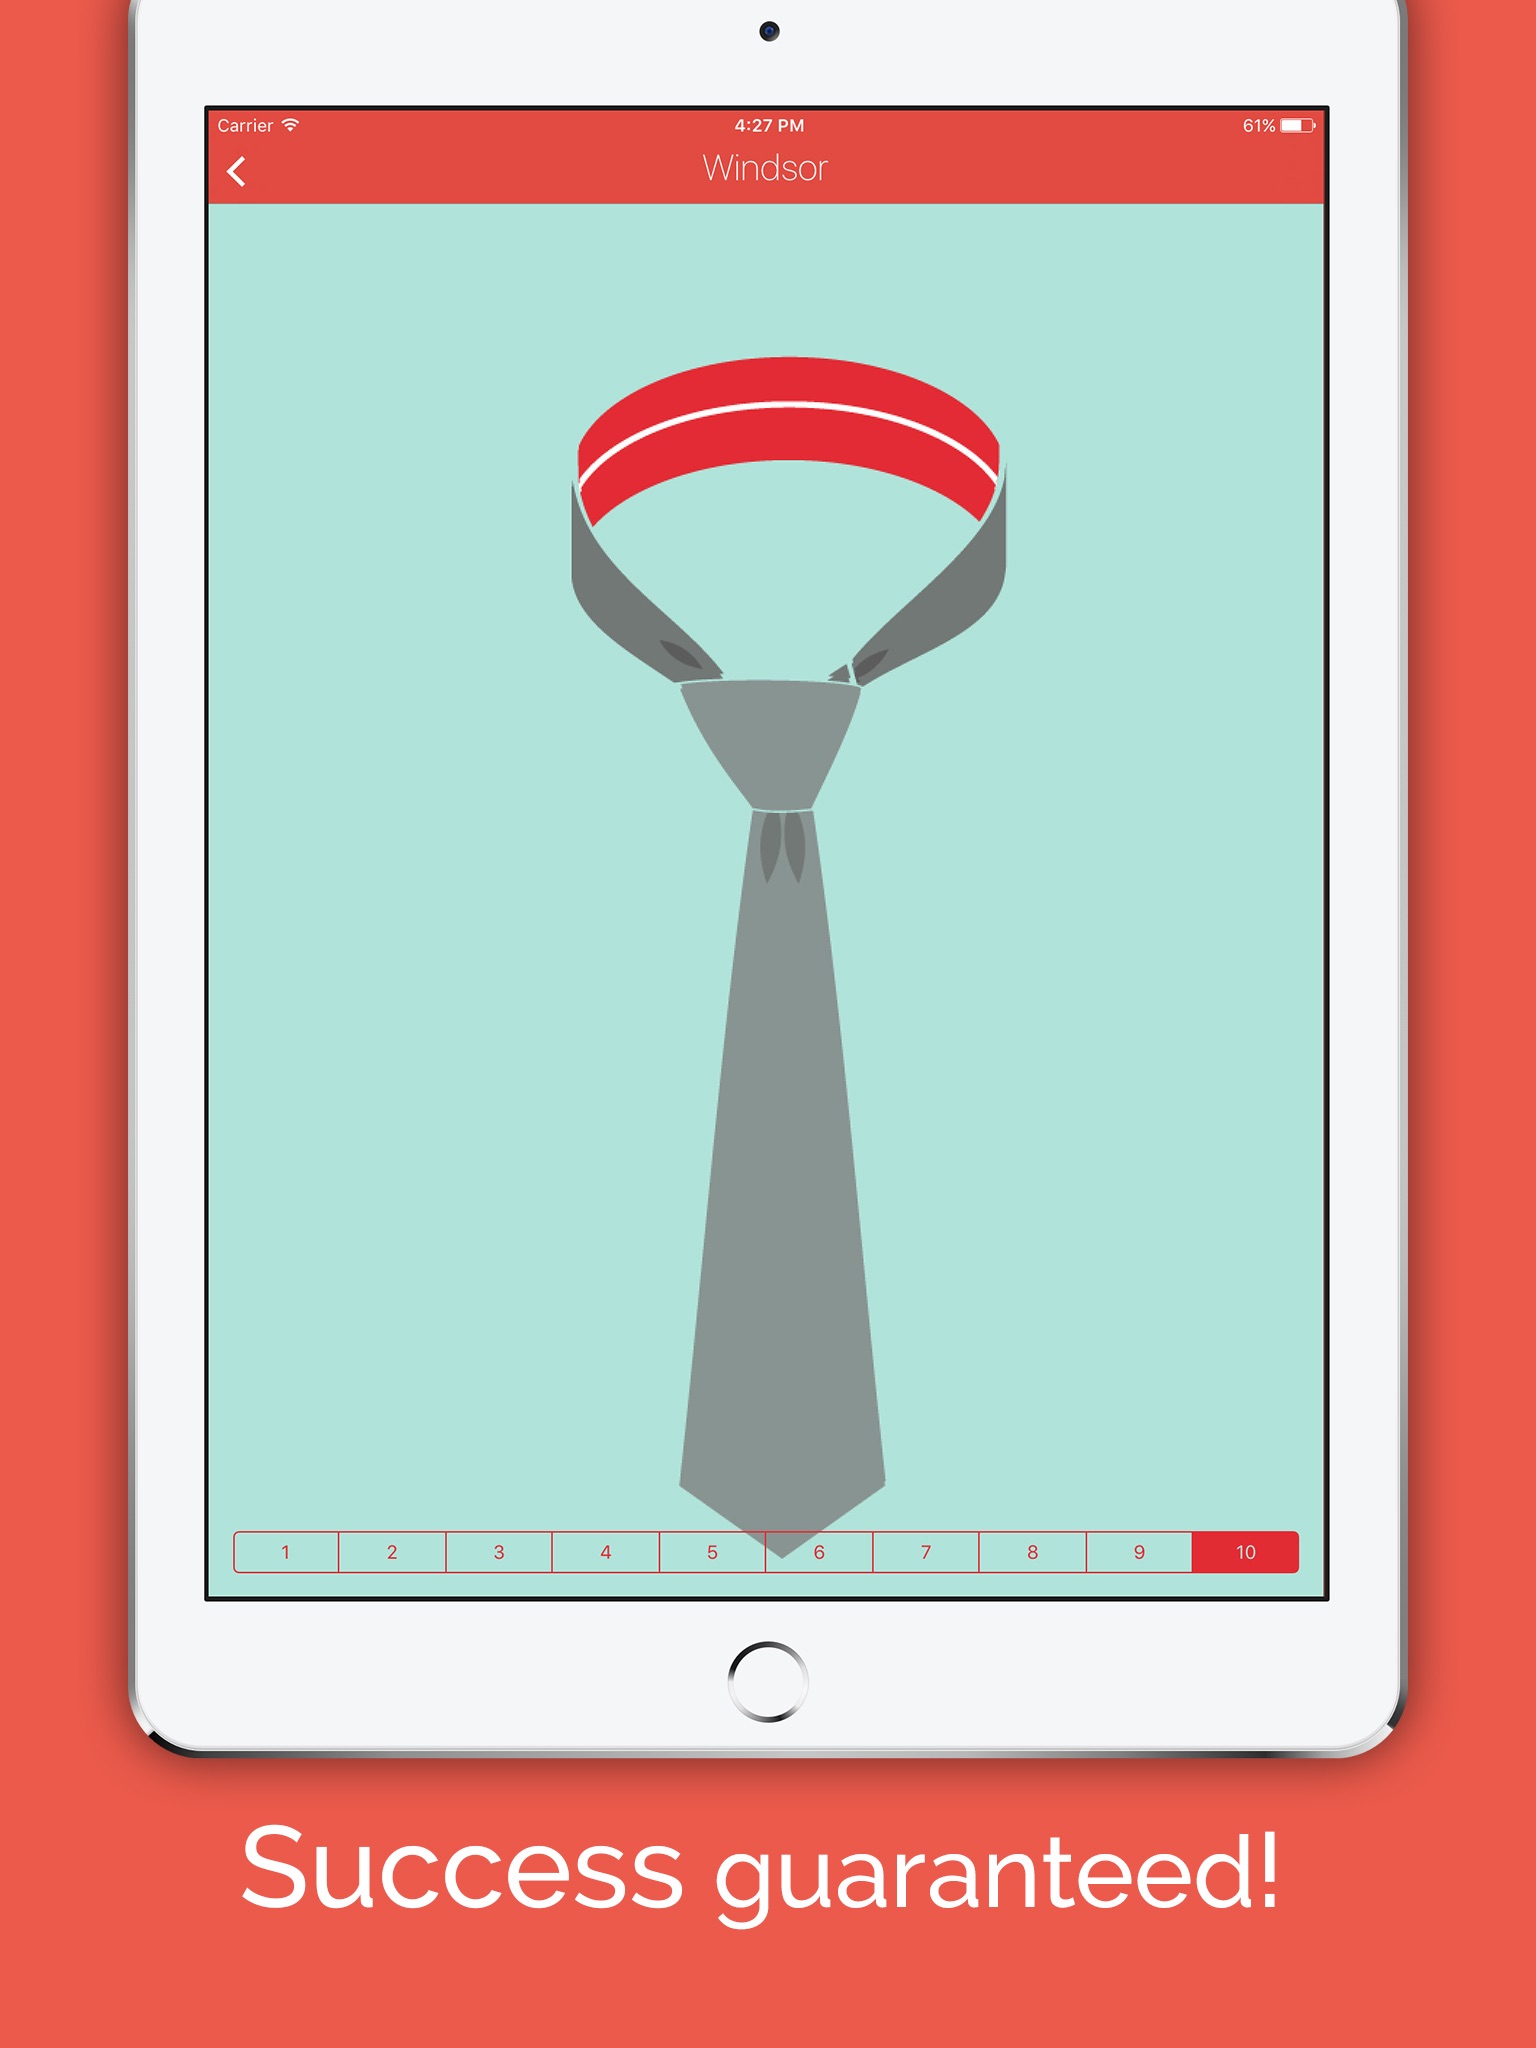 How To Tie a Tie Knot - Guide screenshot 4